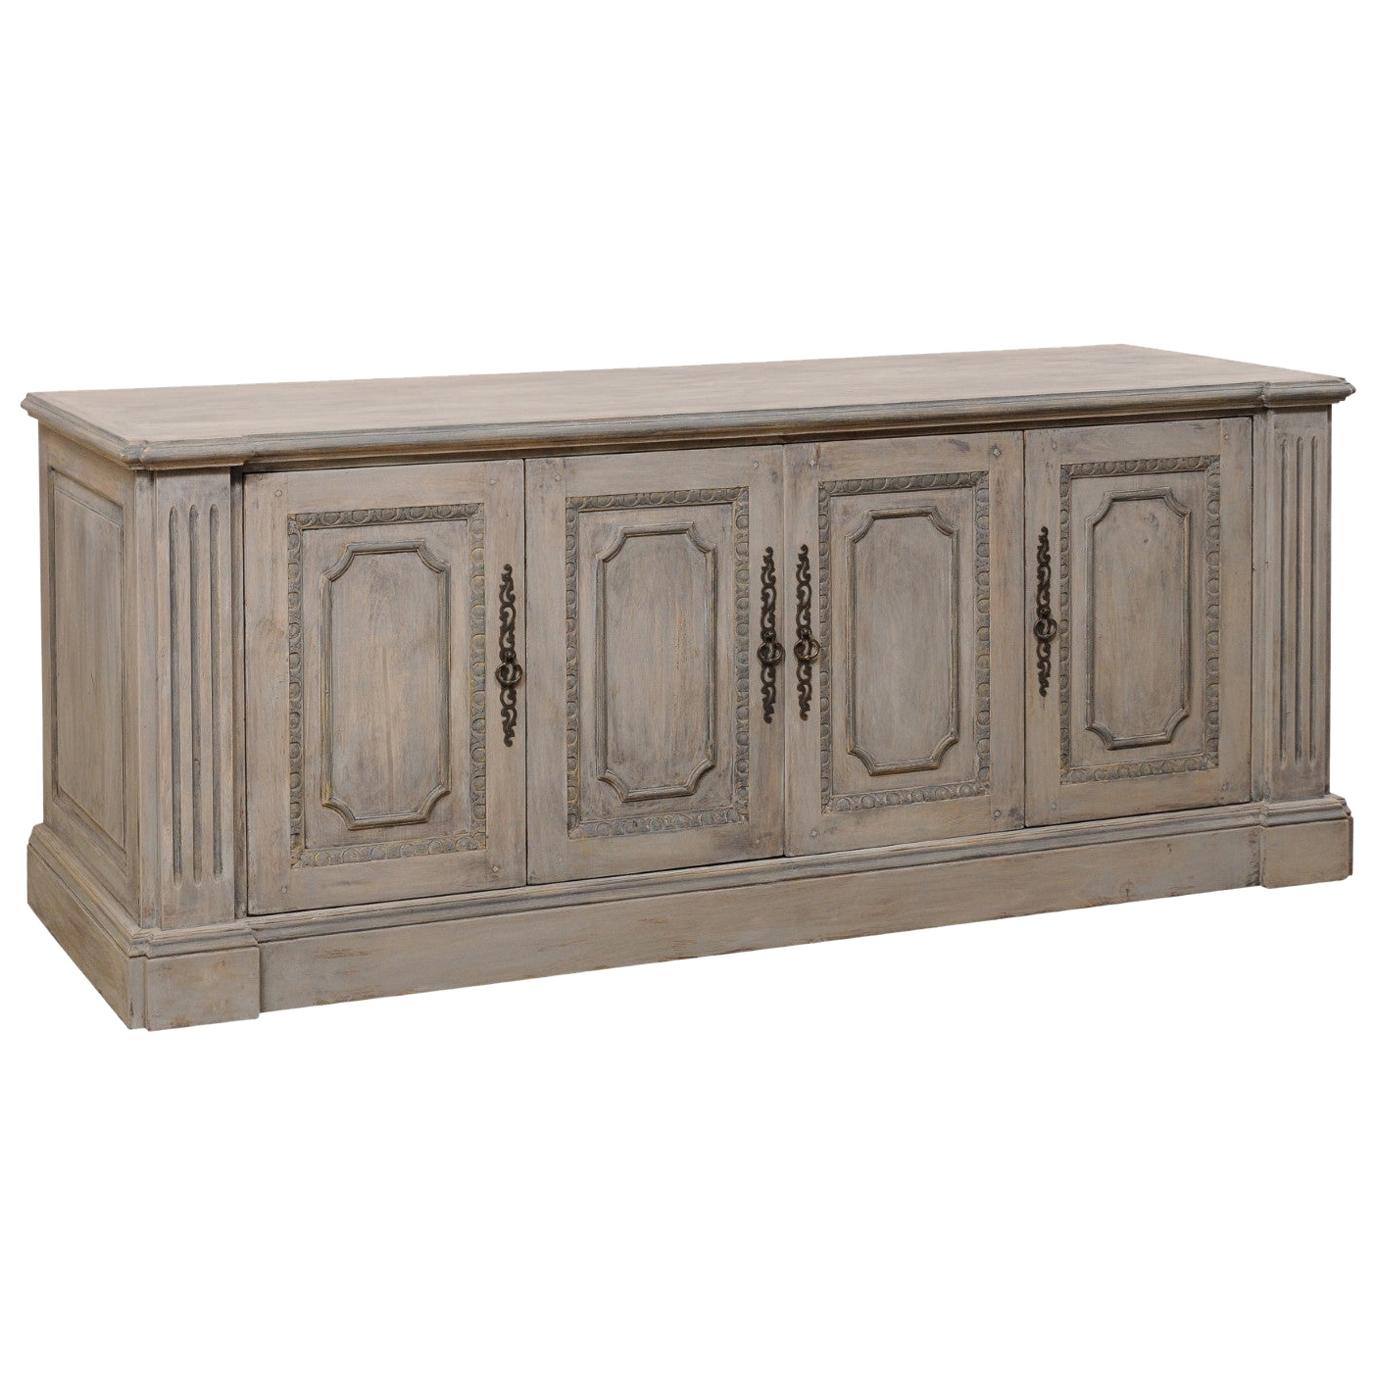 Italian-Style Painted and Carved Wood Buffet Console Cabinet with Great Storage